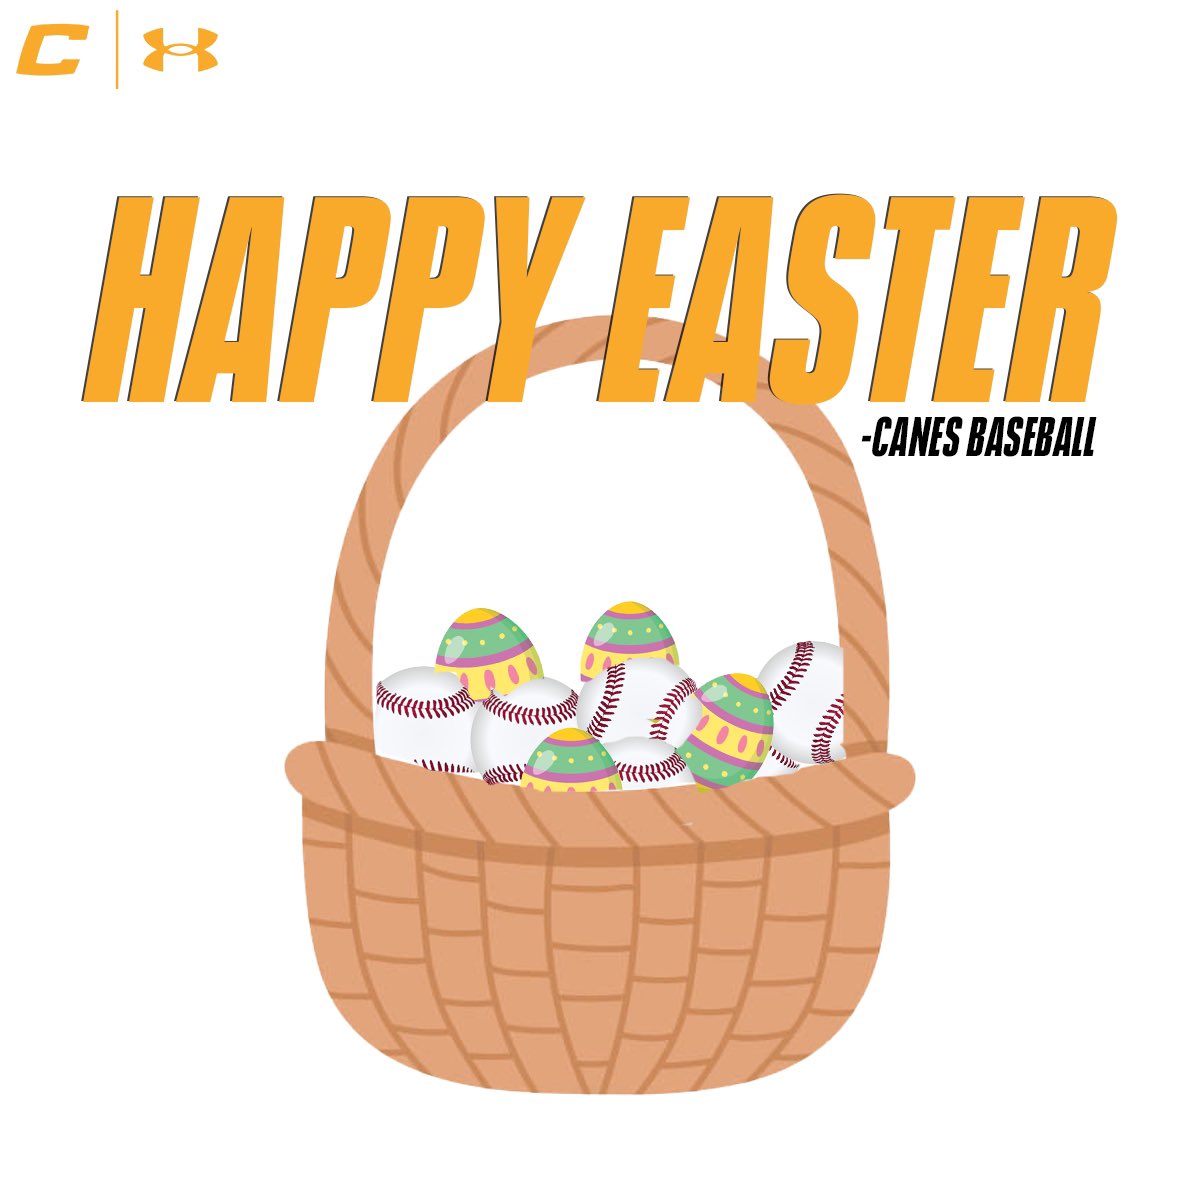 Happy Easter from the Canes Baseball Family! #TheCanesBB | #DifferentBrandOfBaseball